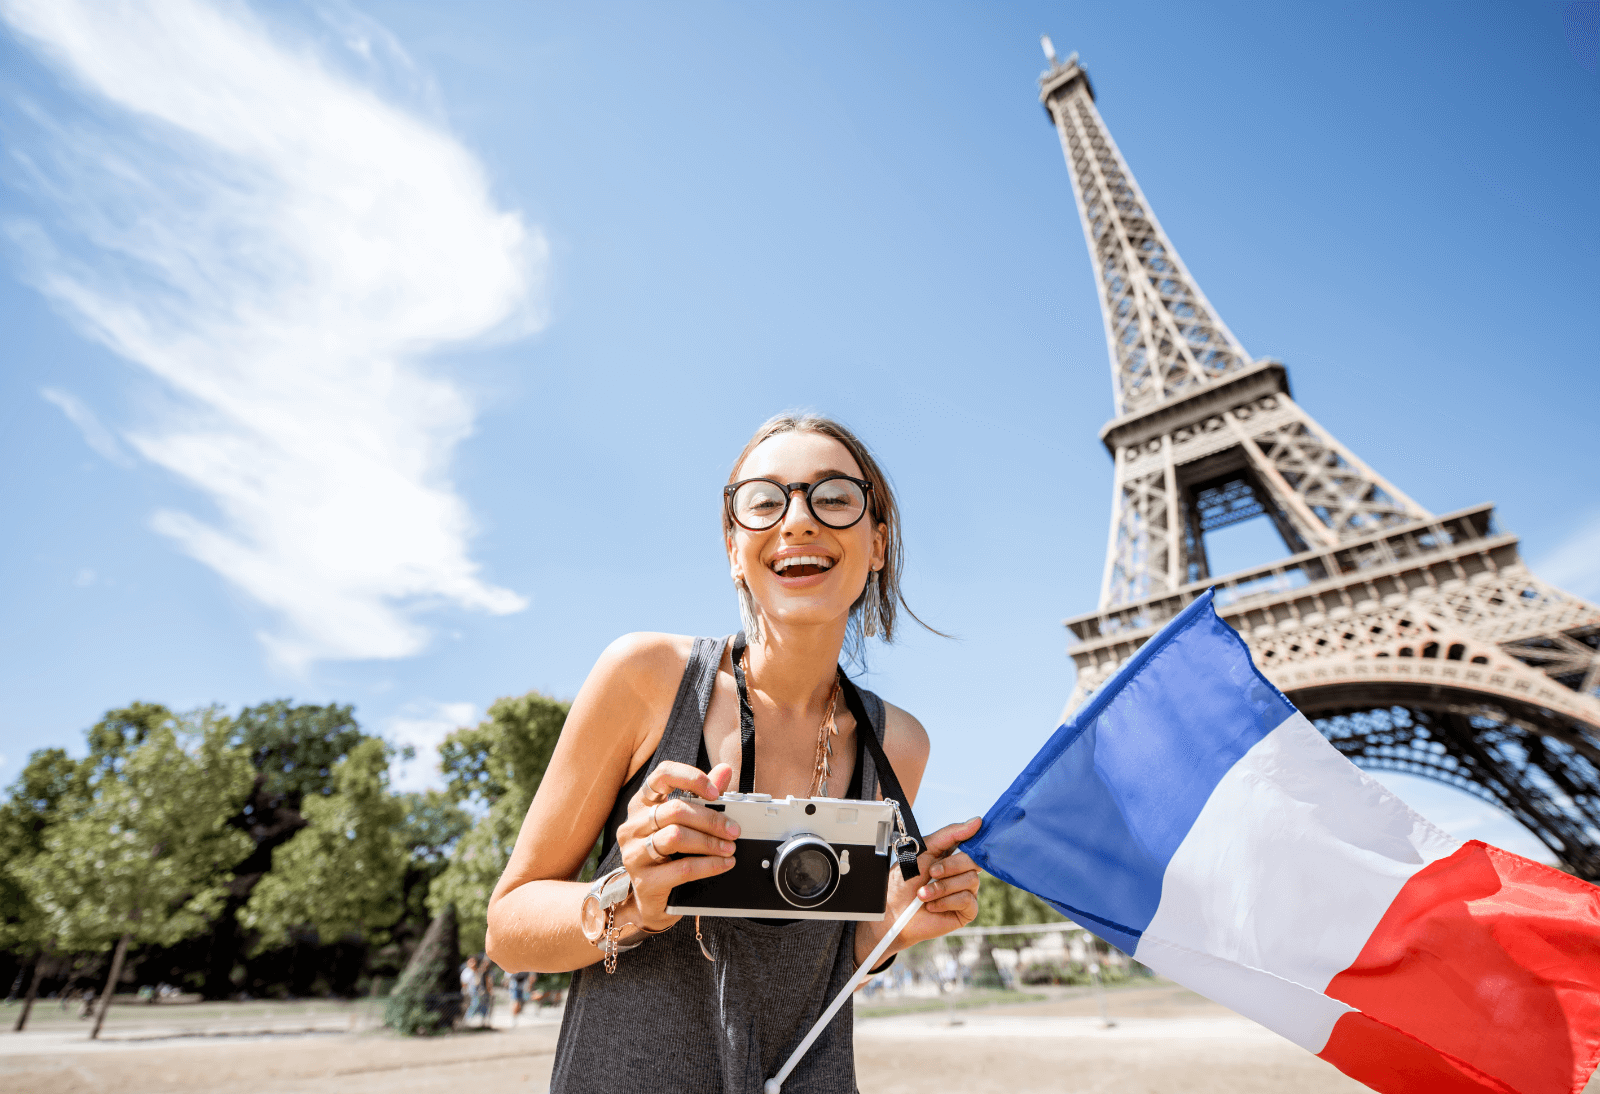 Girl standing next to the Eiffel Tower in Paris with a French flag